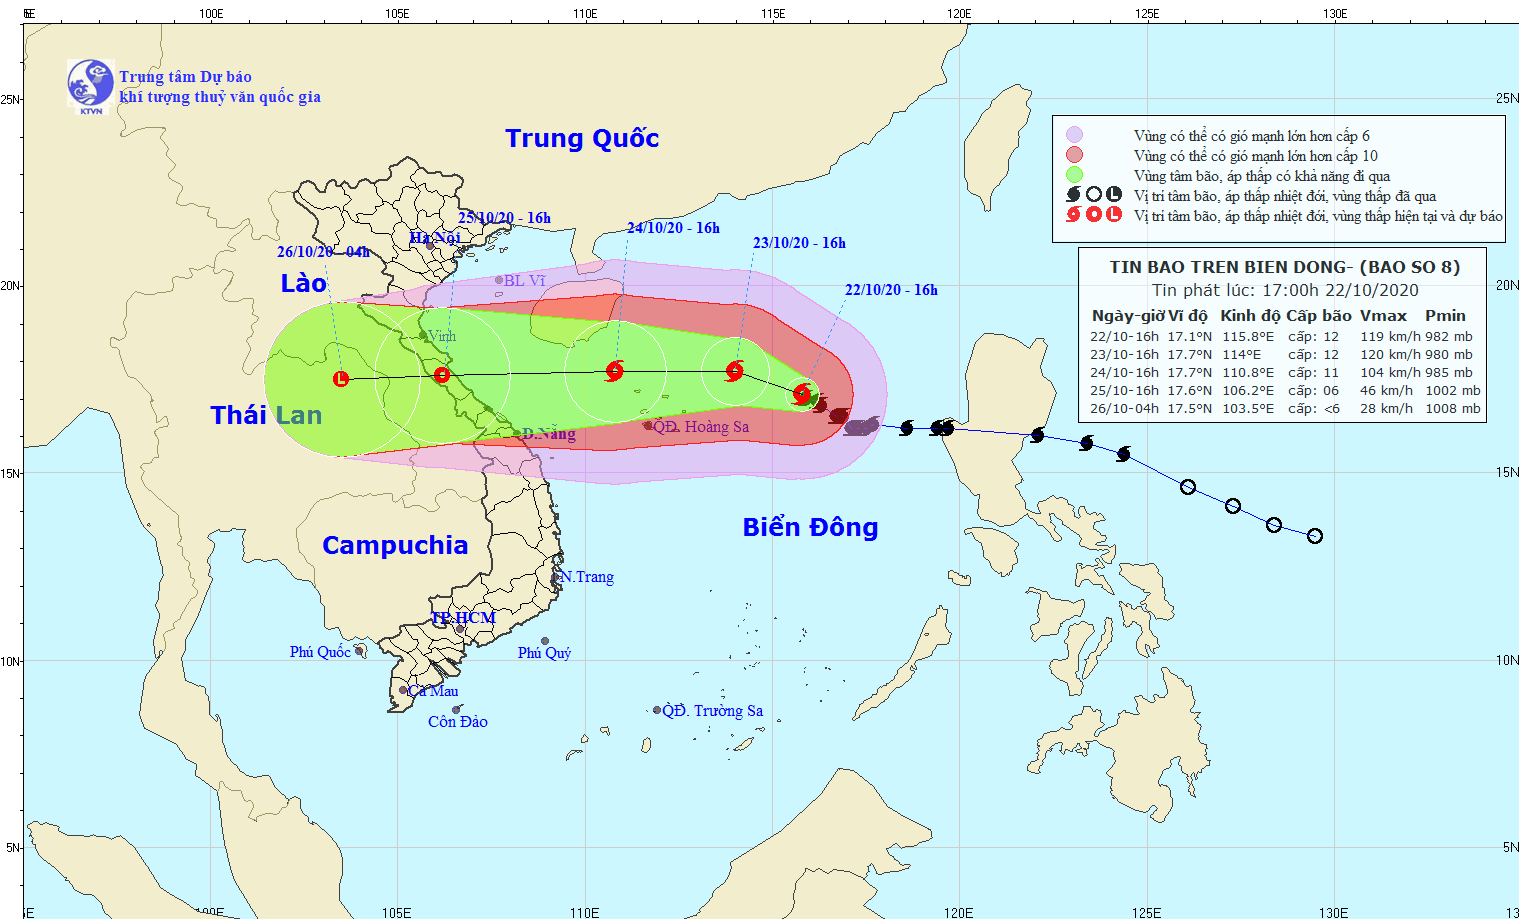 Storm Saudel is approaching the mainland provinces from Nghe An to Quang Tri